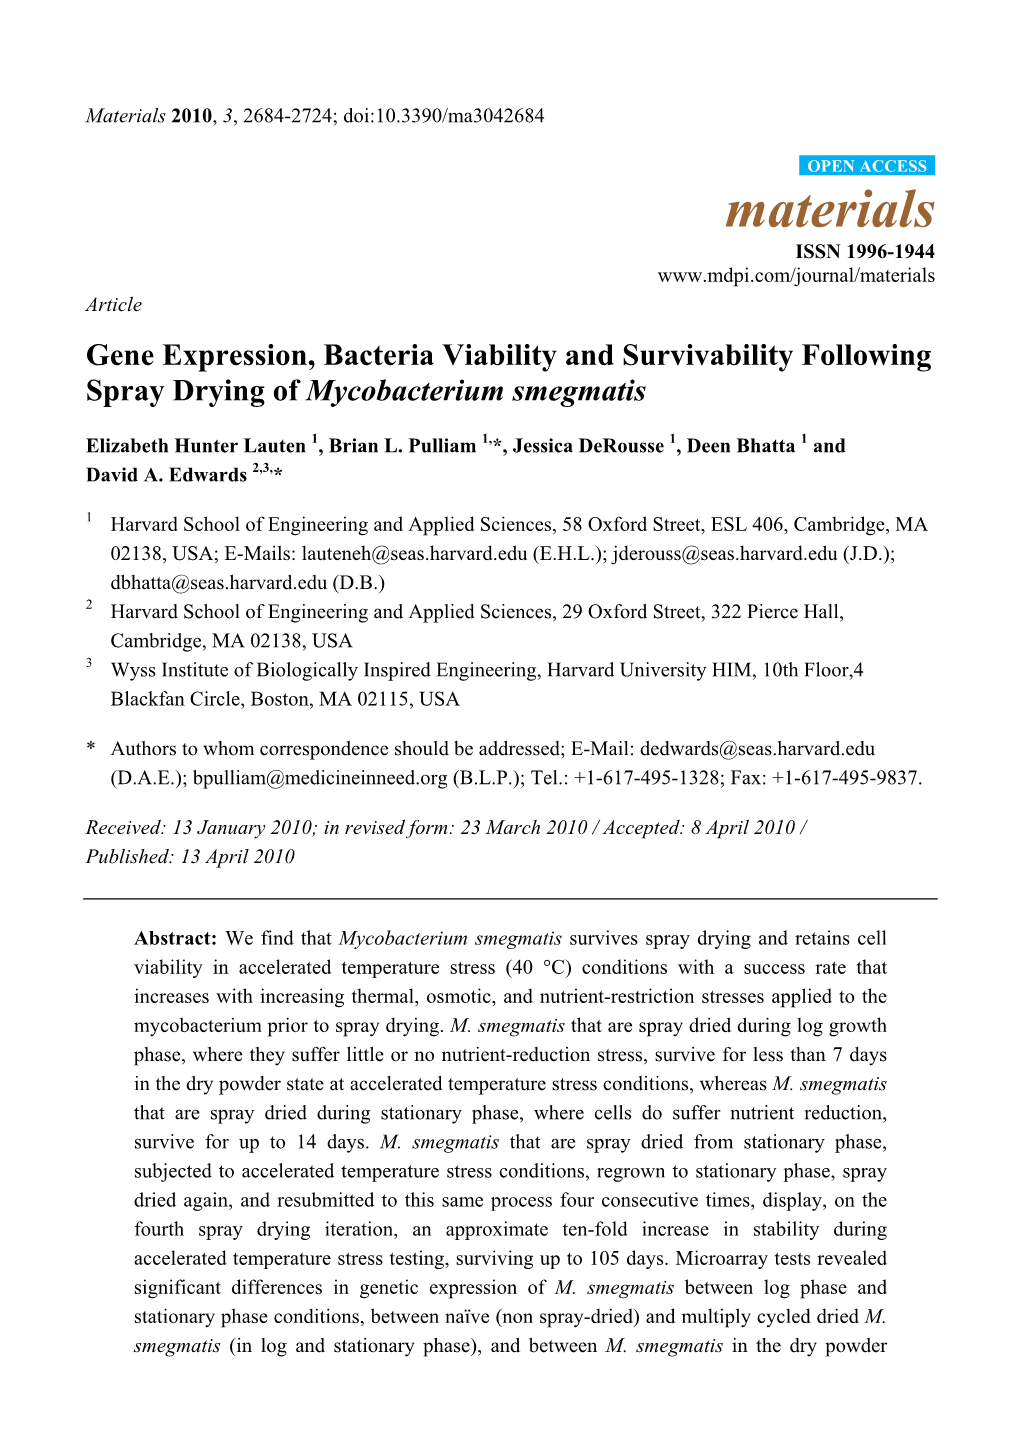 Gene Expression, Bacteria Viability and Survivability Following Spray Drying of Mycobacterium Smegmatis